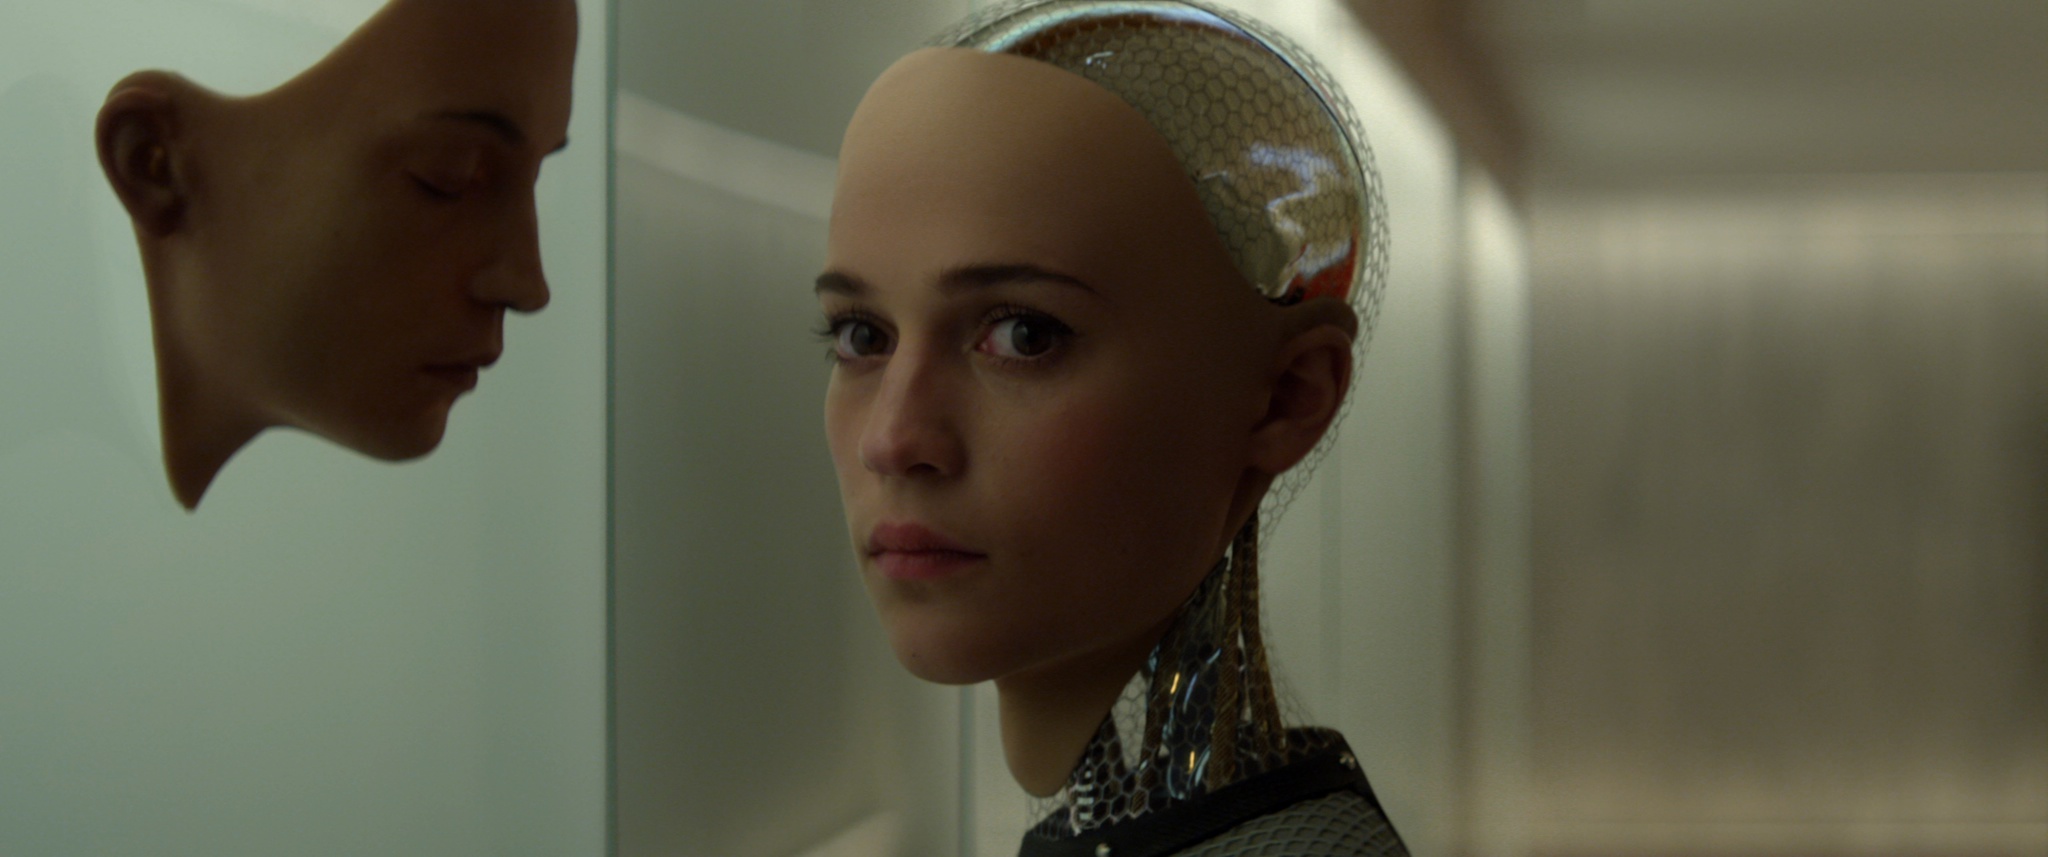 2 ex machina a thrilling search for sentience